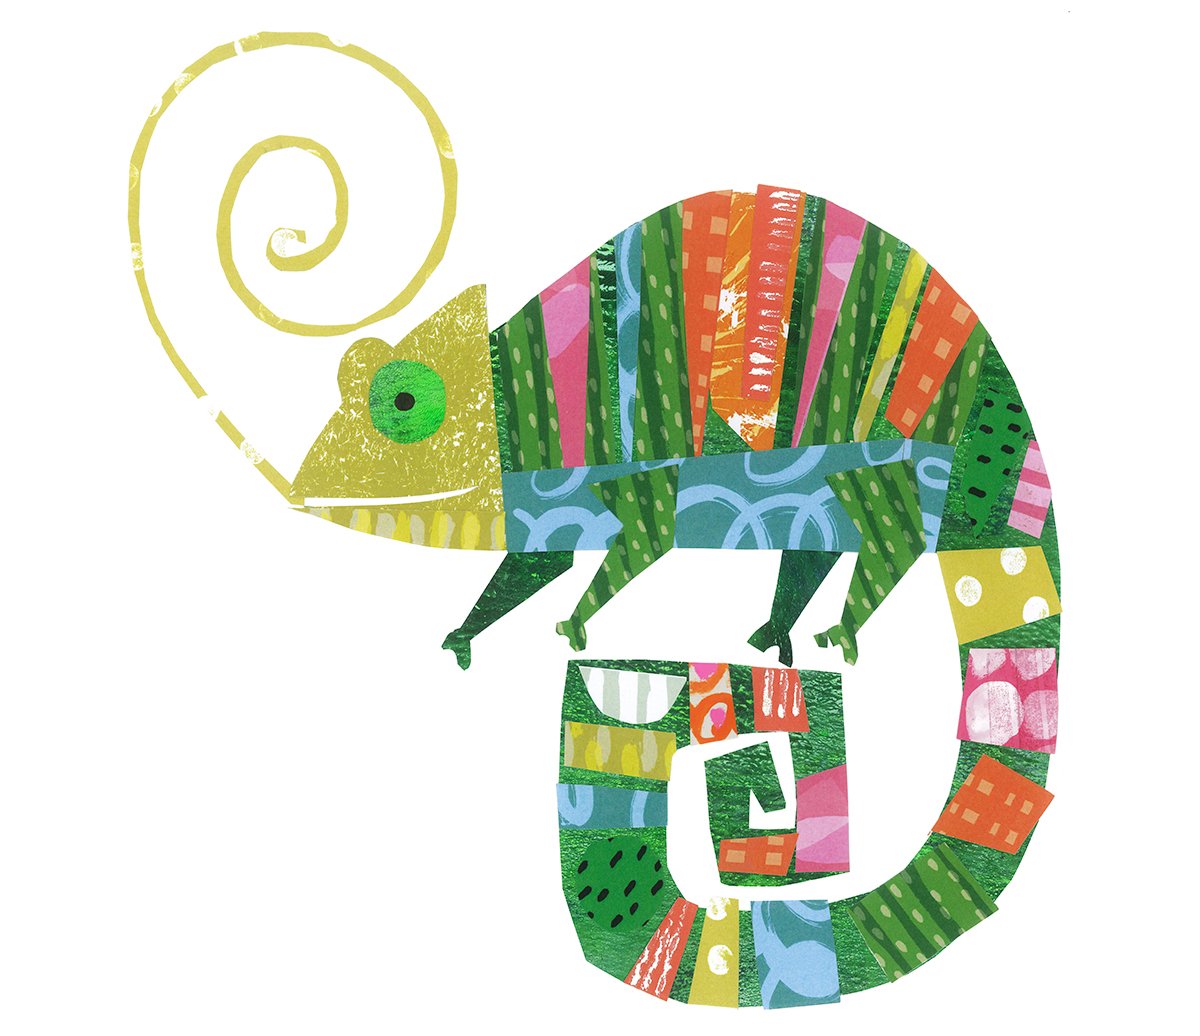 clare-youngs-patchwork-chameleon.jpg